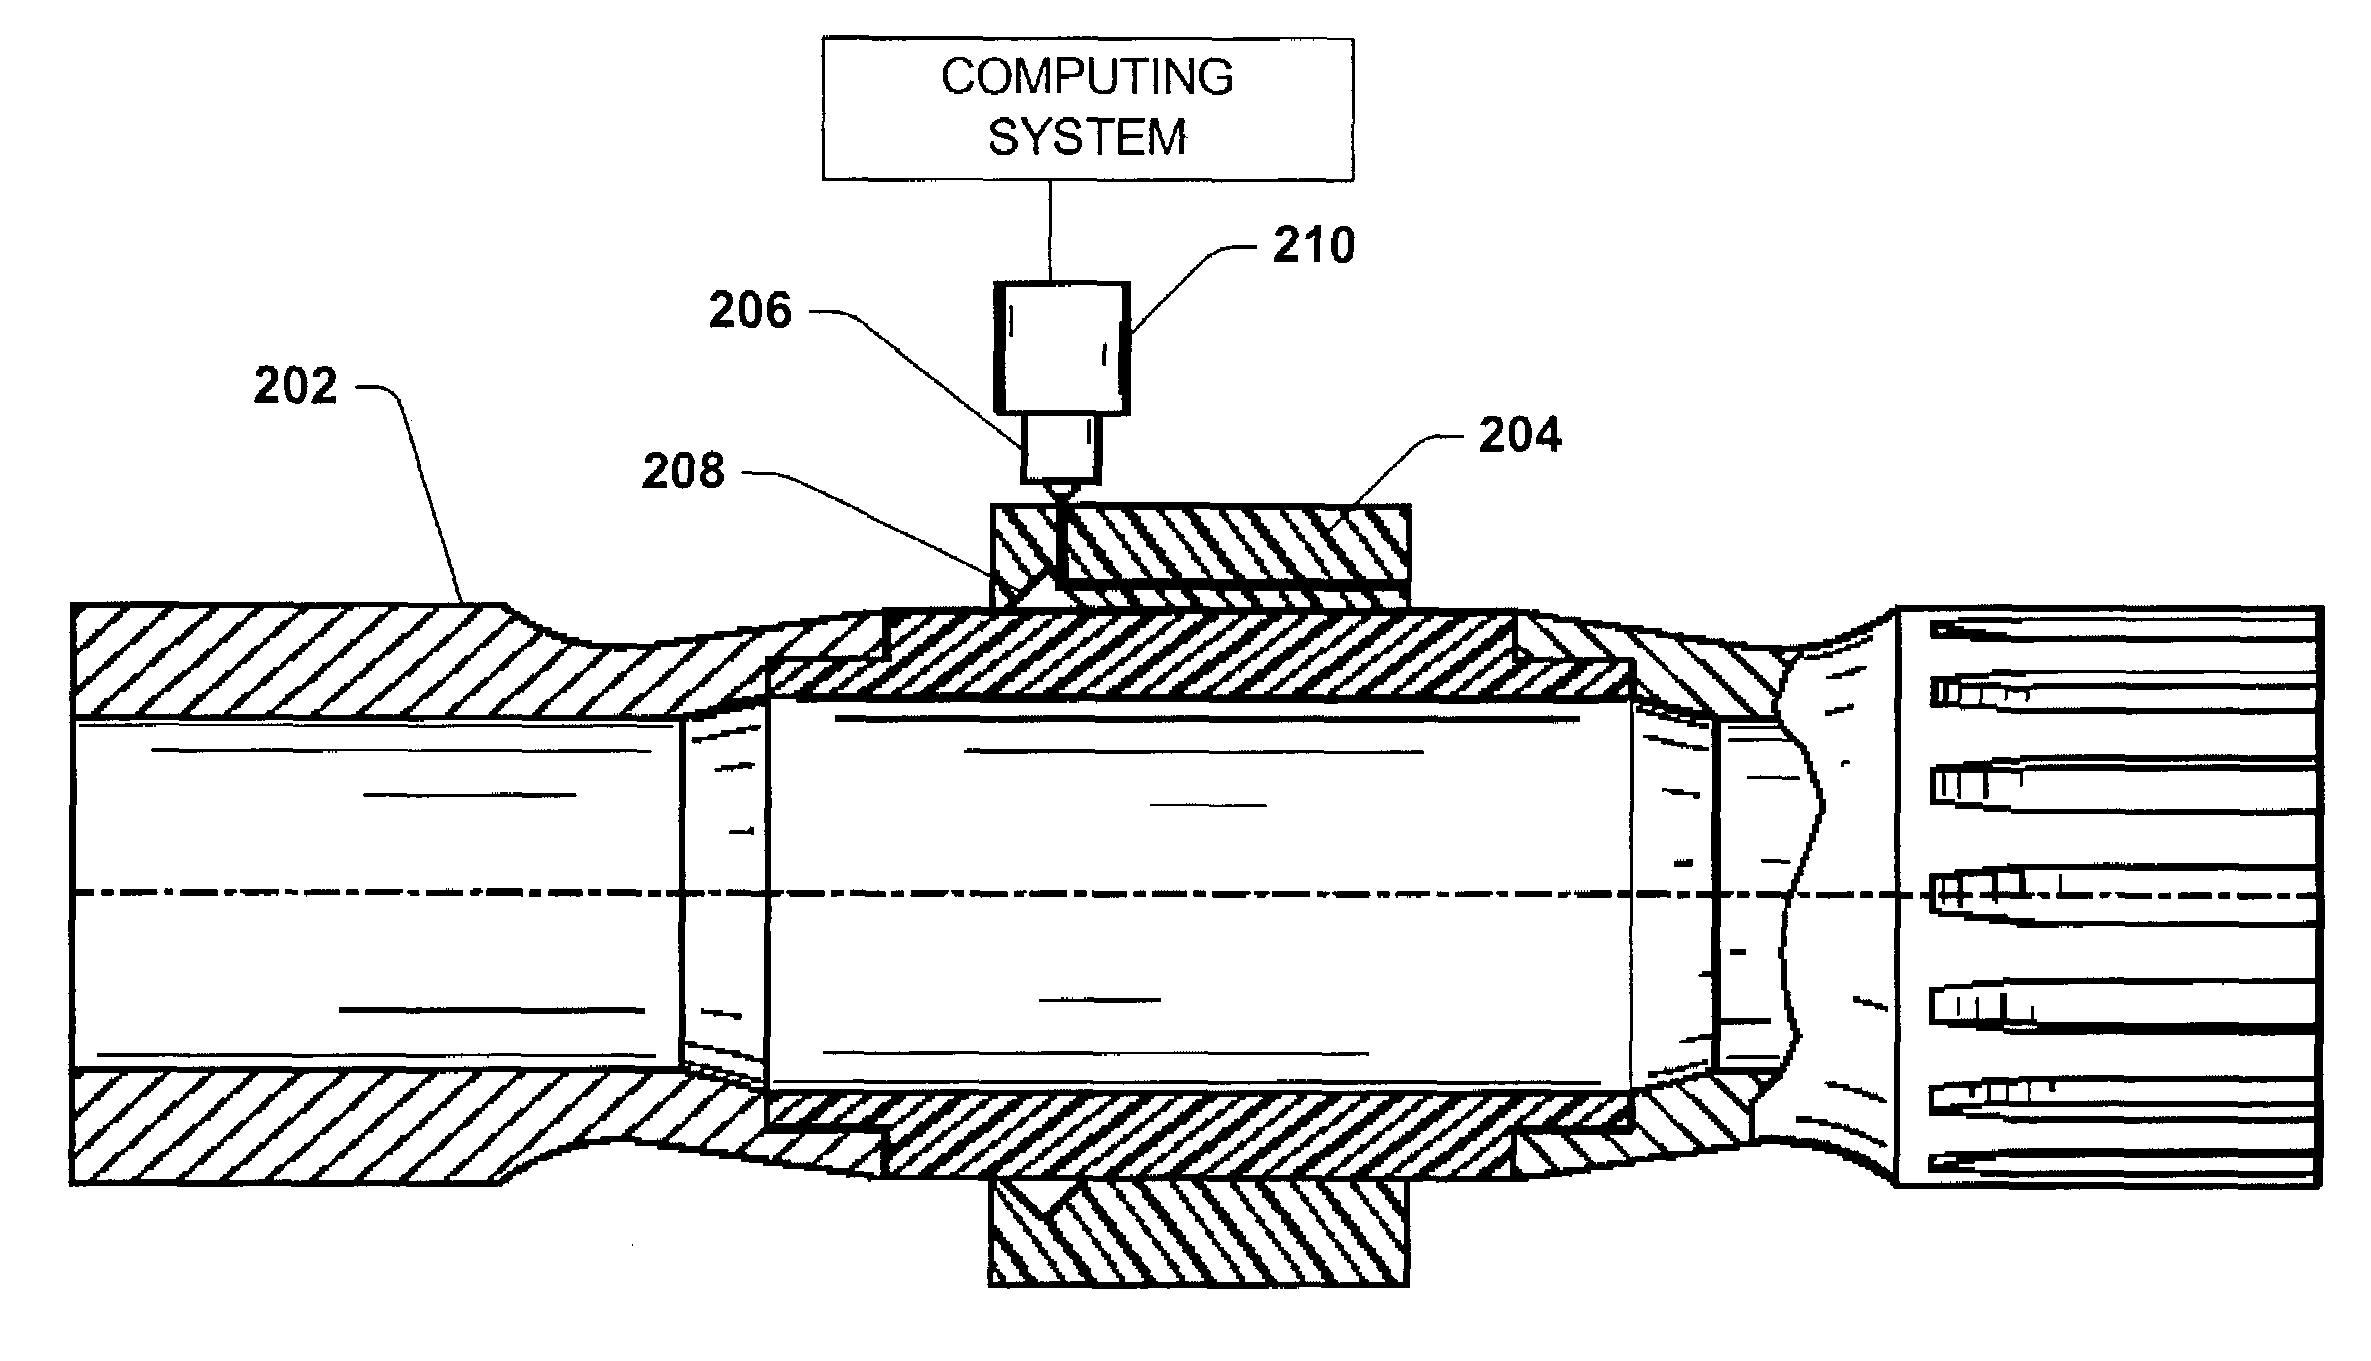 System and method for sensing torque on a rotating shaft